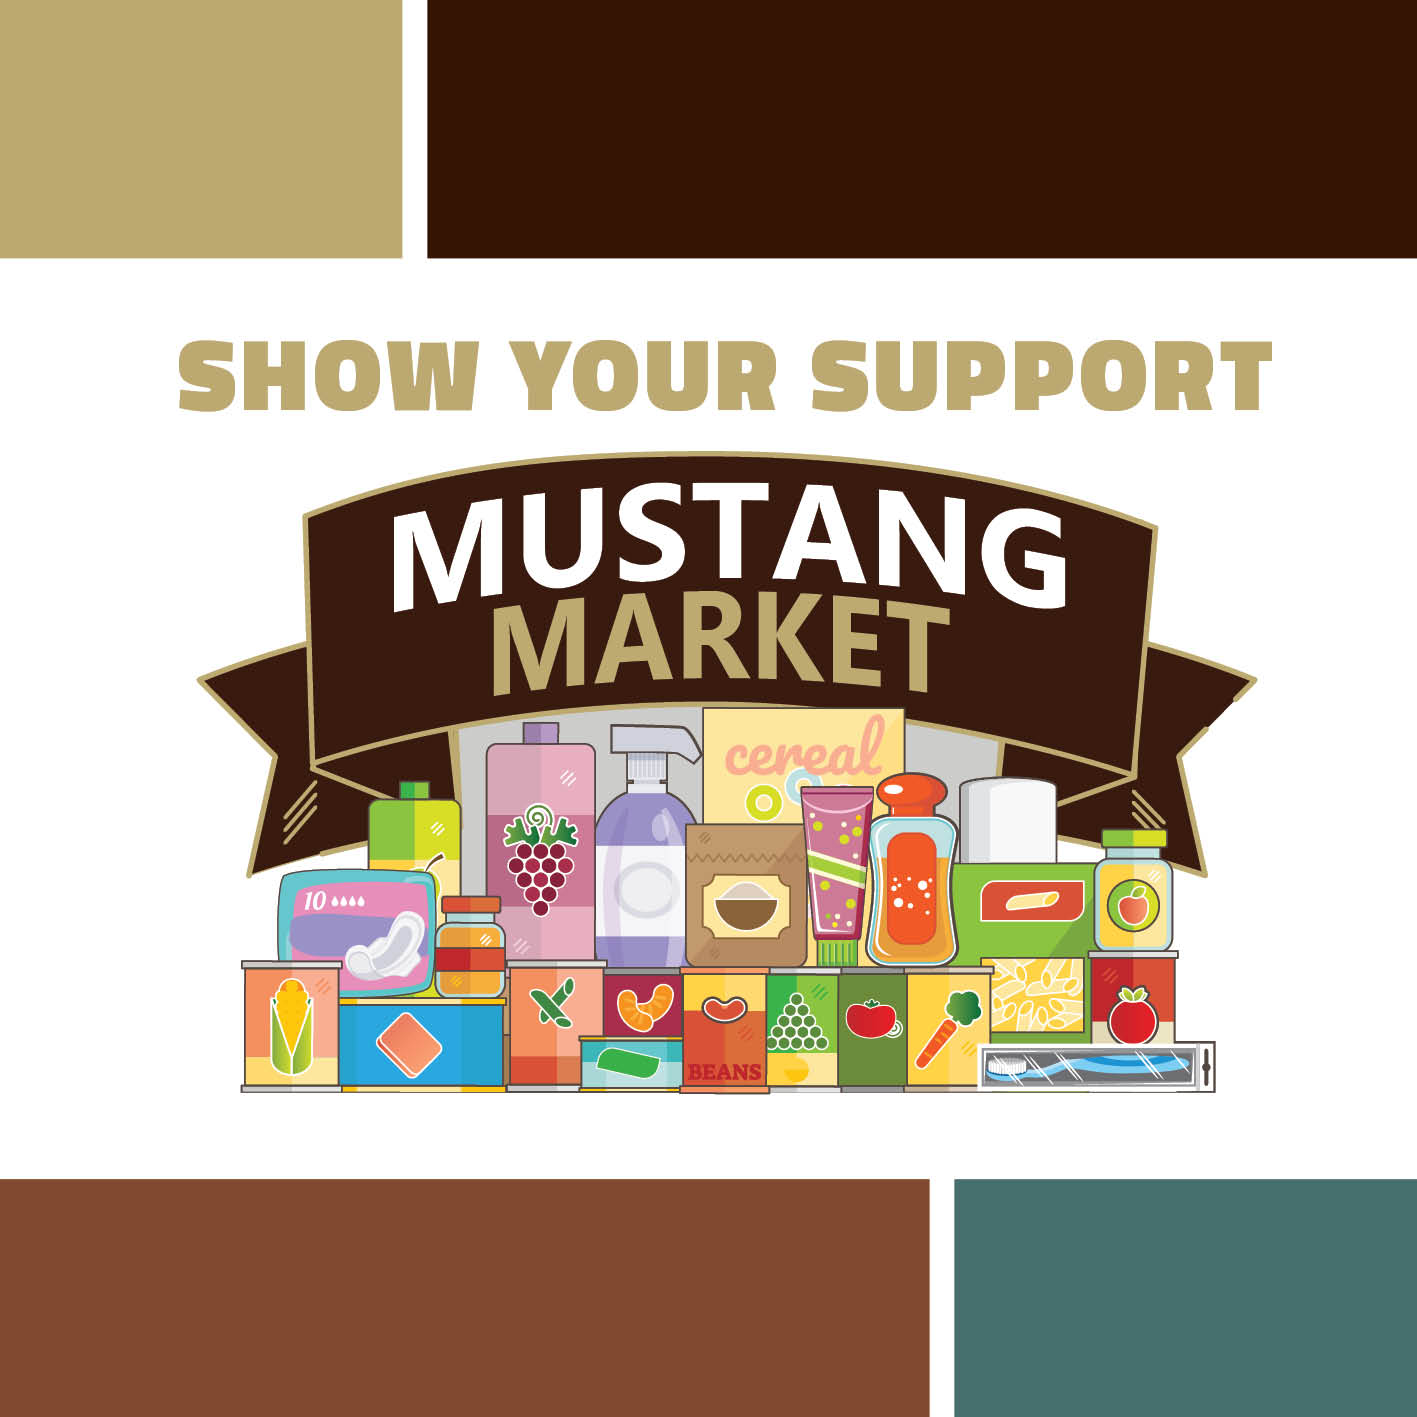 Show your support for the Mustang Market